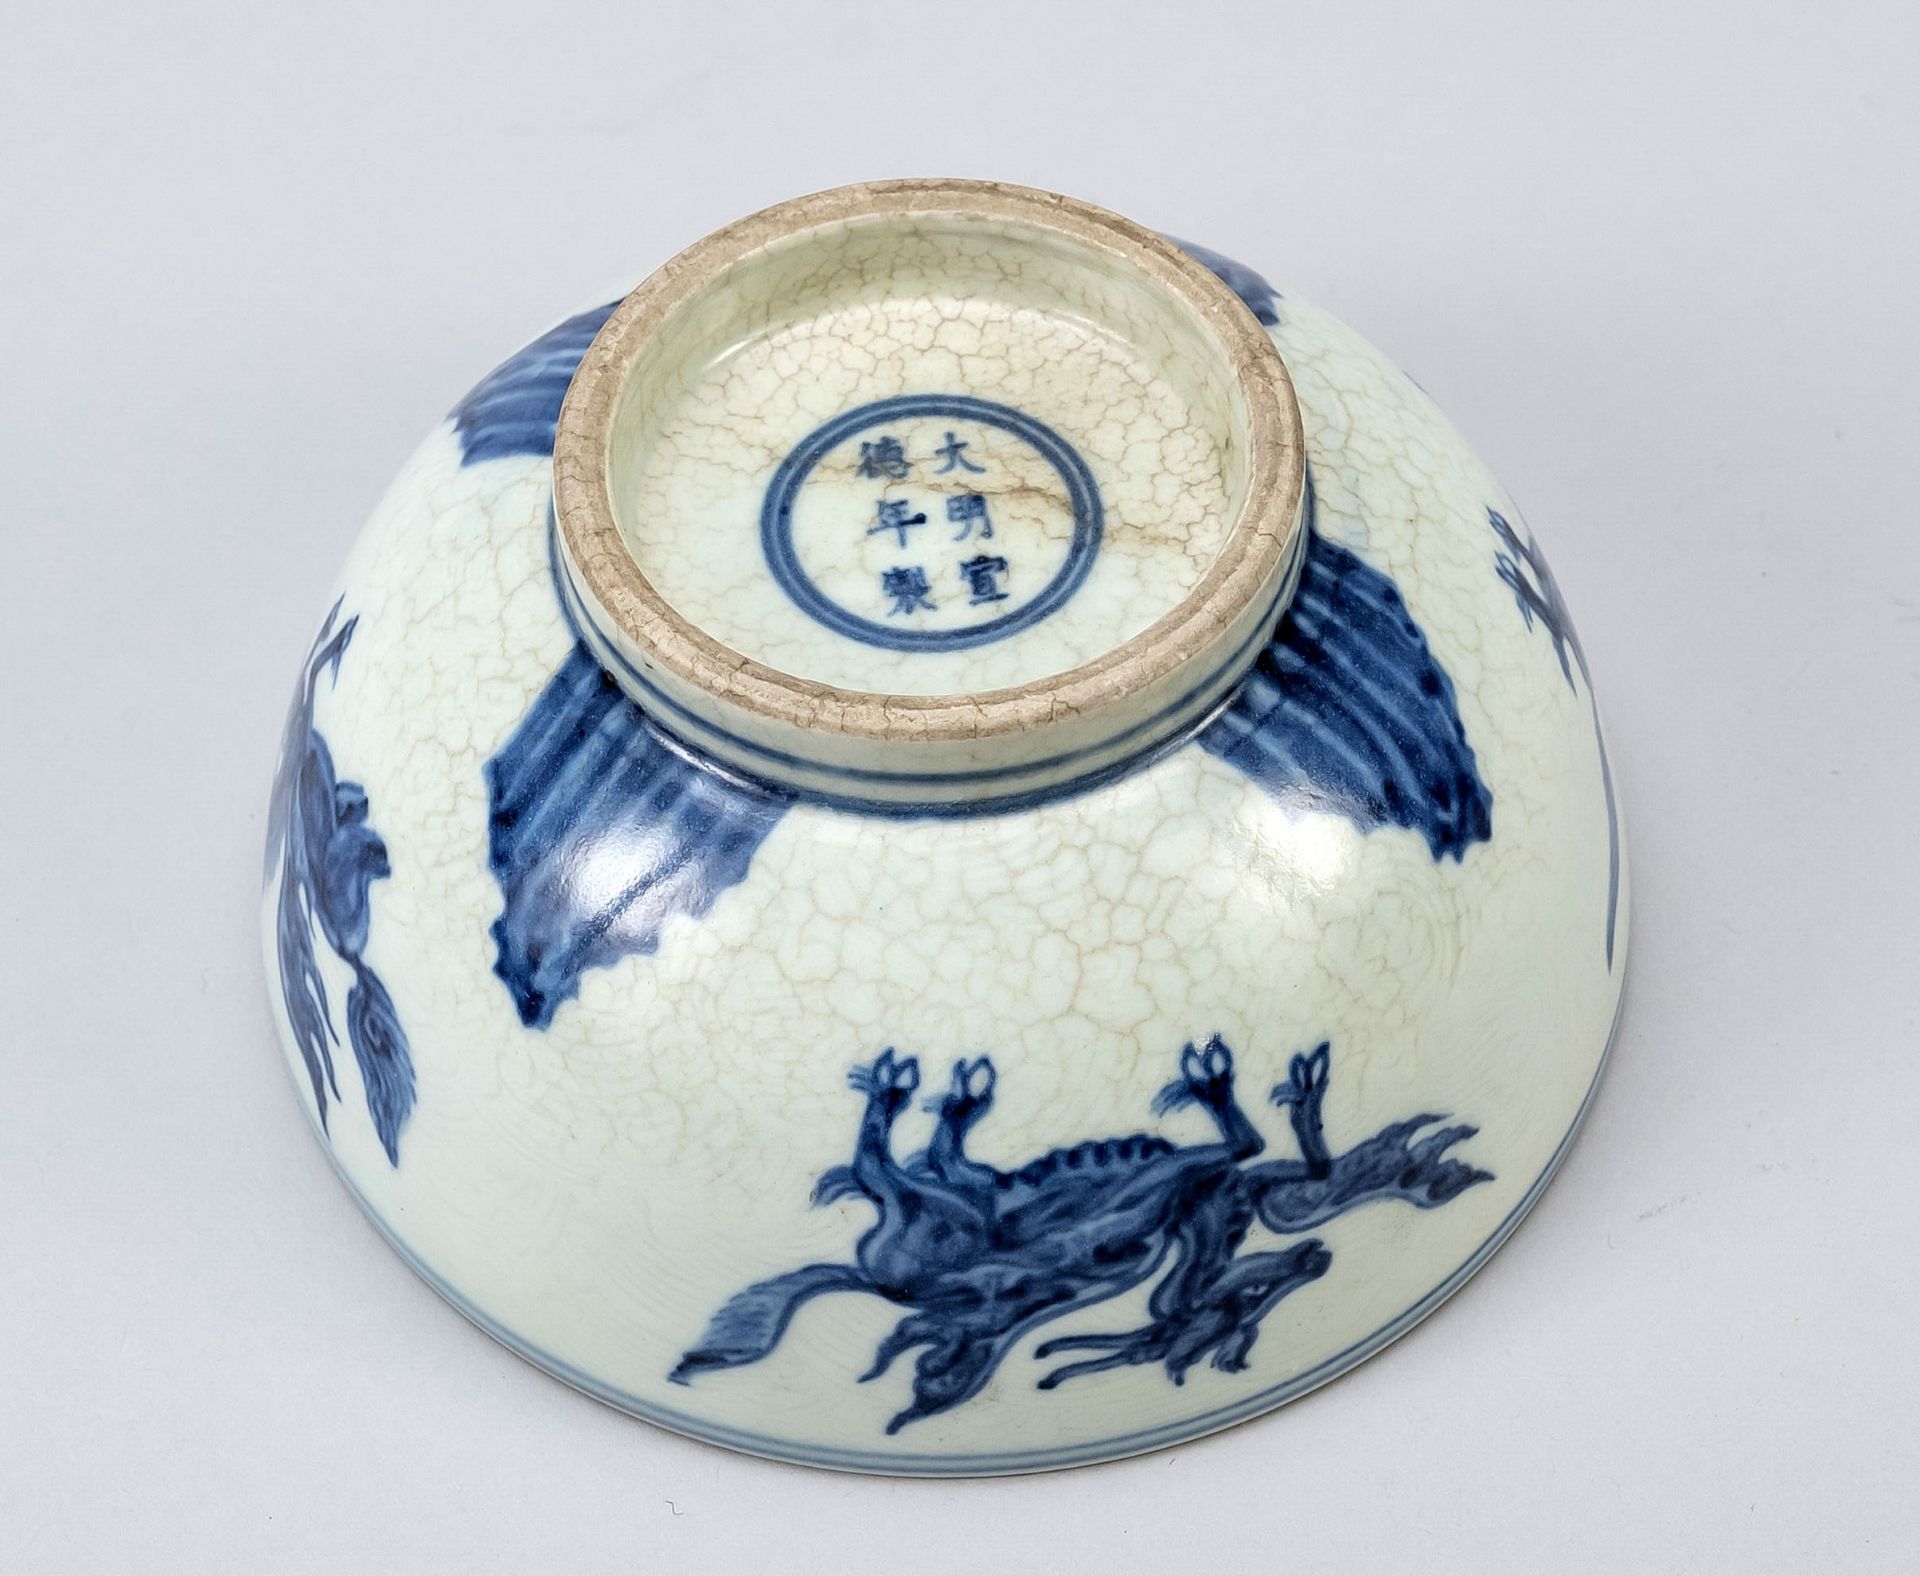 Bowl with mythical creatures and hidden decoration, probably Ming dynasty(1368-1644), porcelain bowl - Image 2 of 3